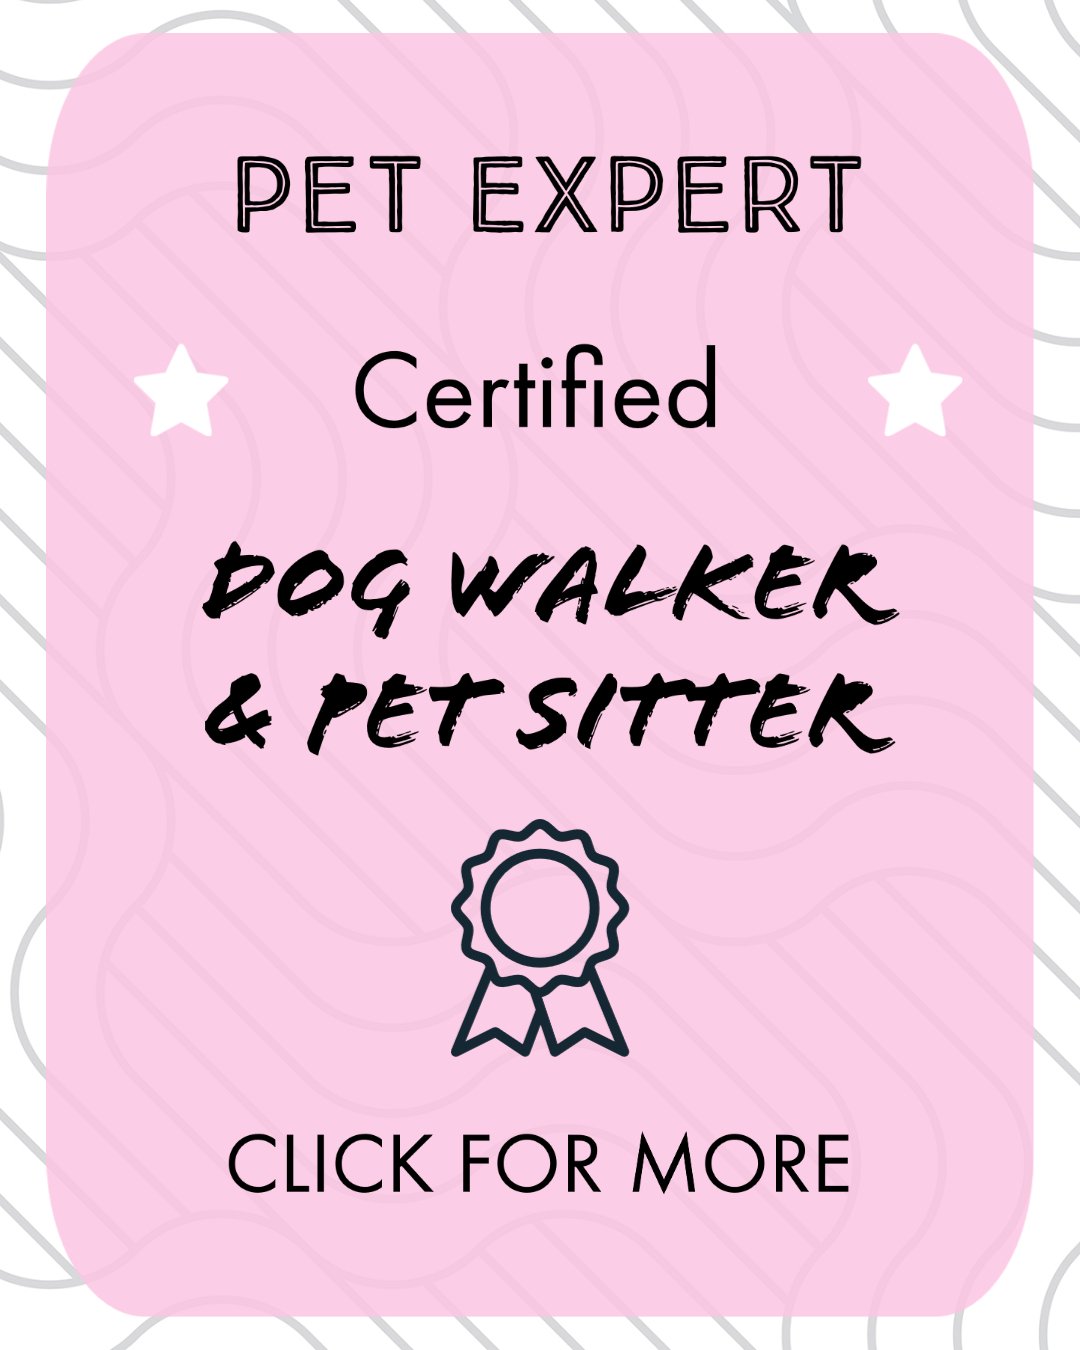 pet sitter certified_skilled knowledgeable trained staff.jpg